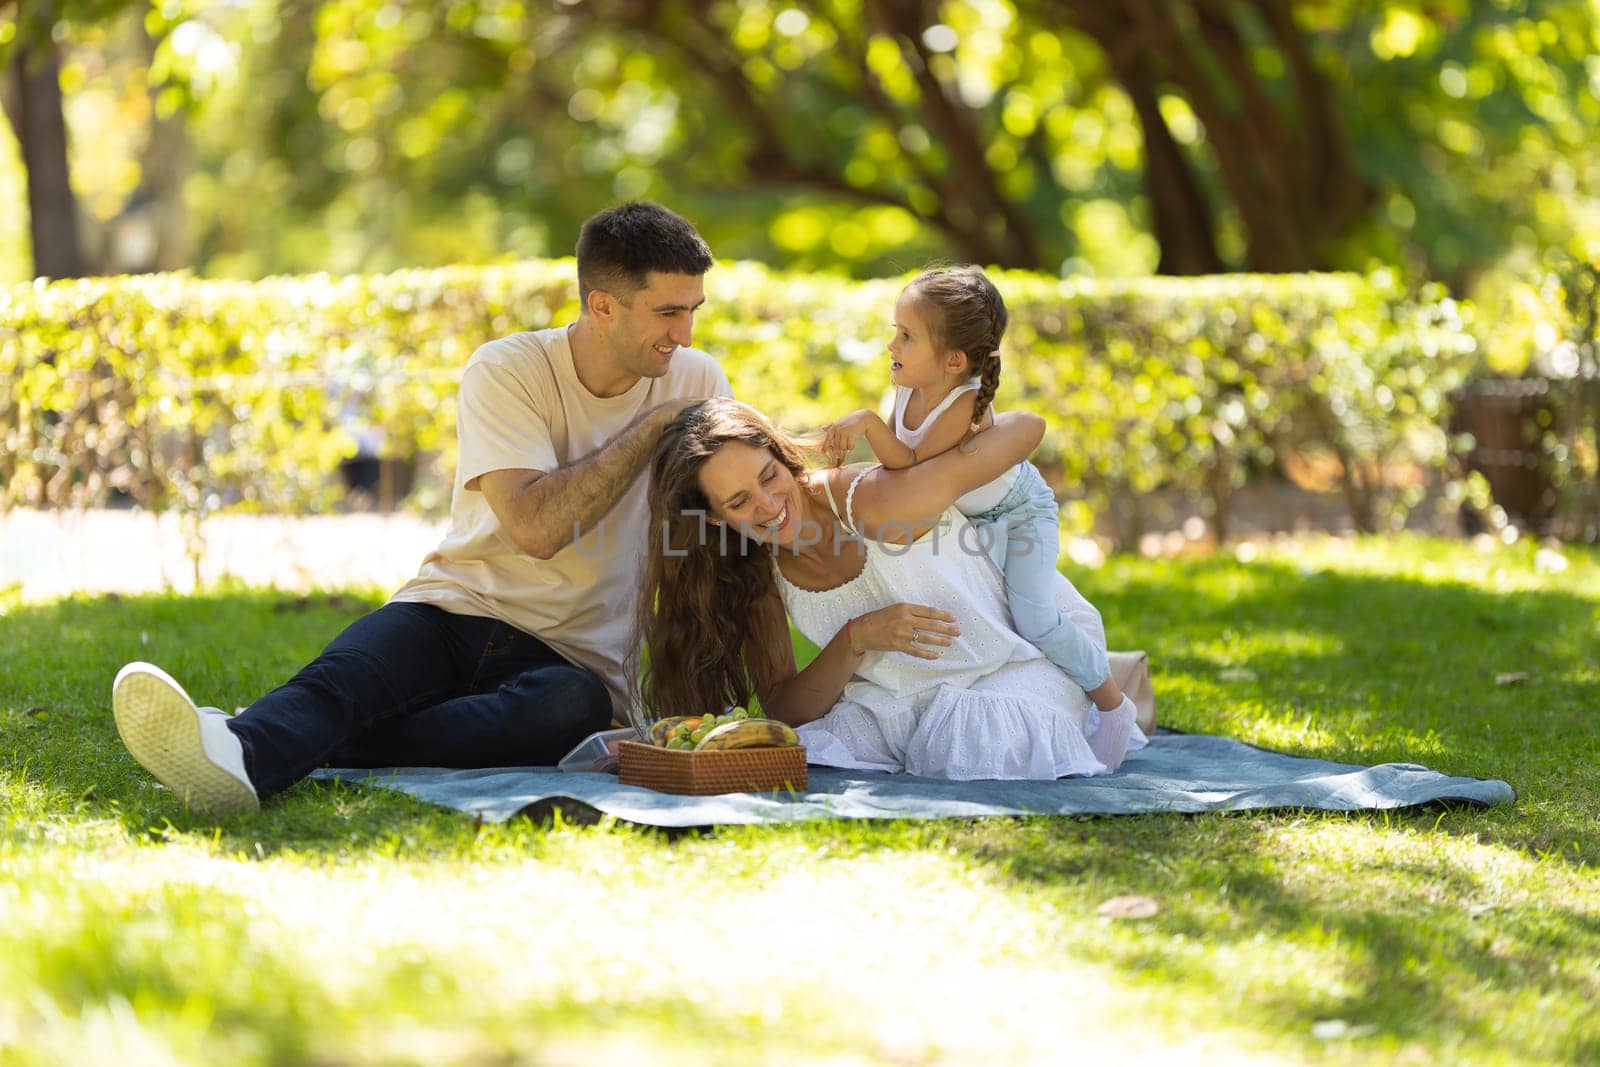 Young family having a picnic and having fun in the park. Mid shot